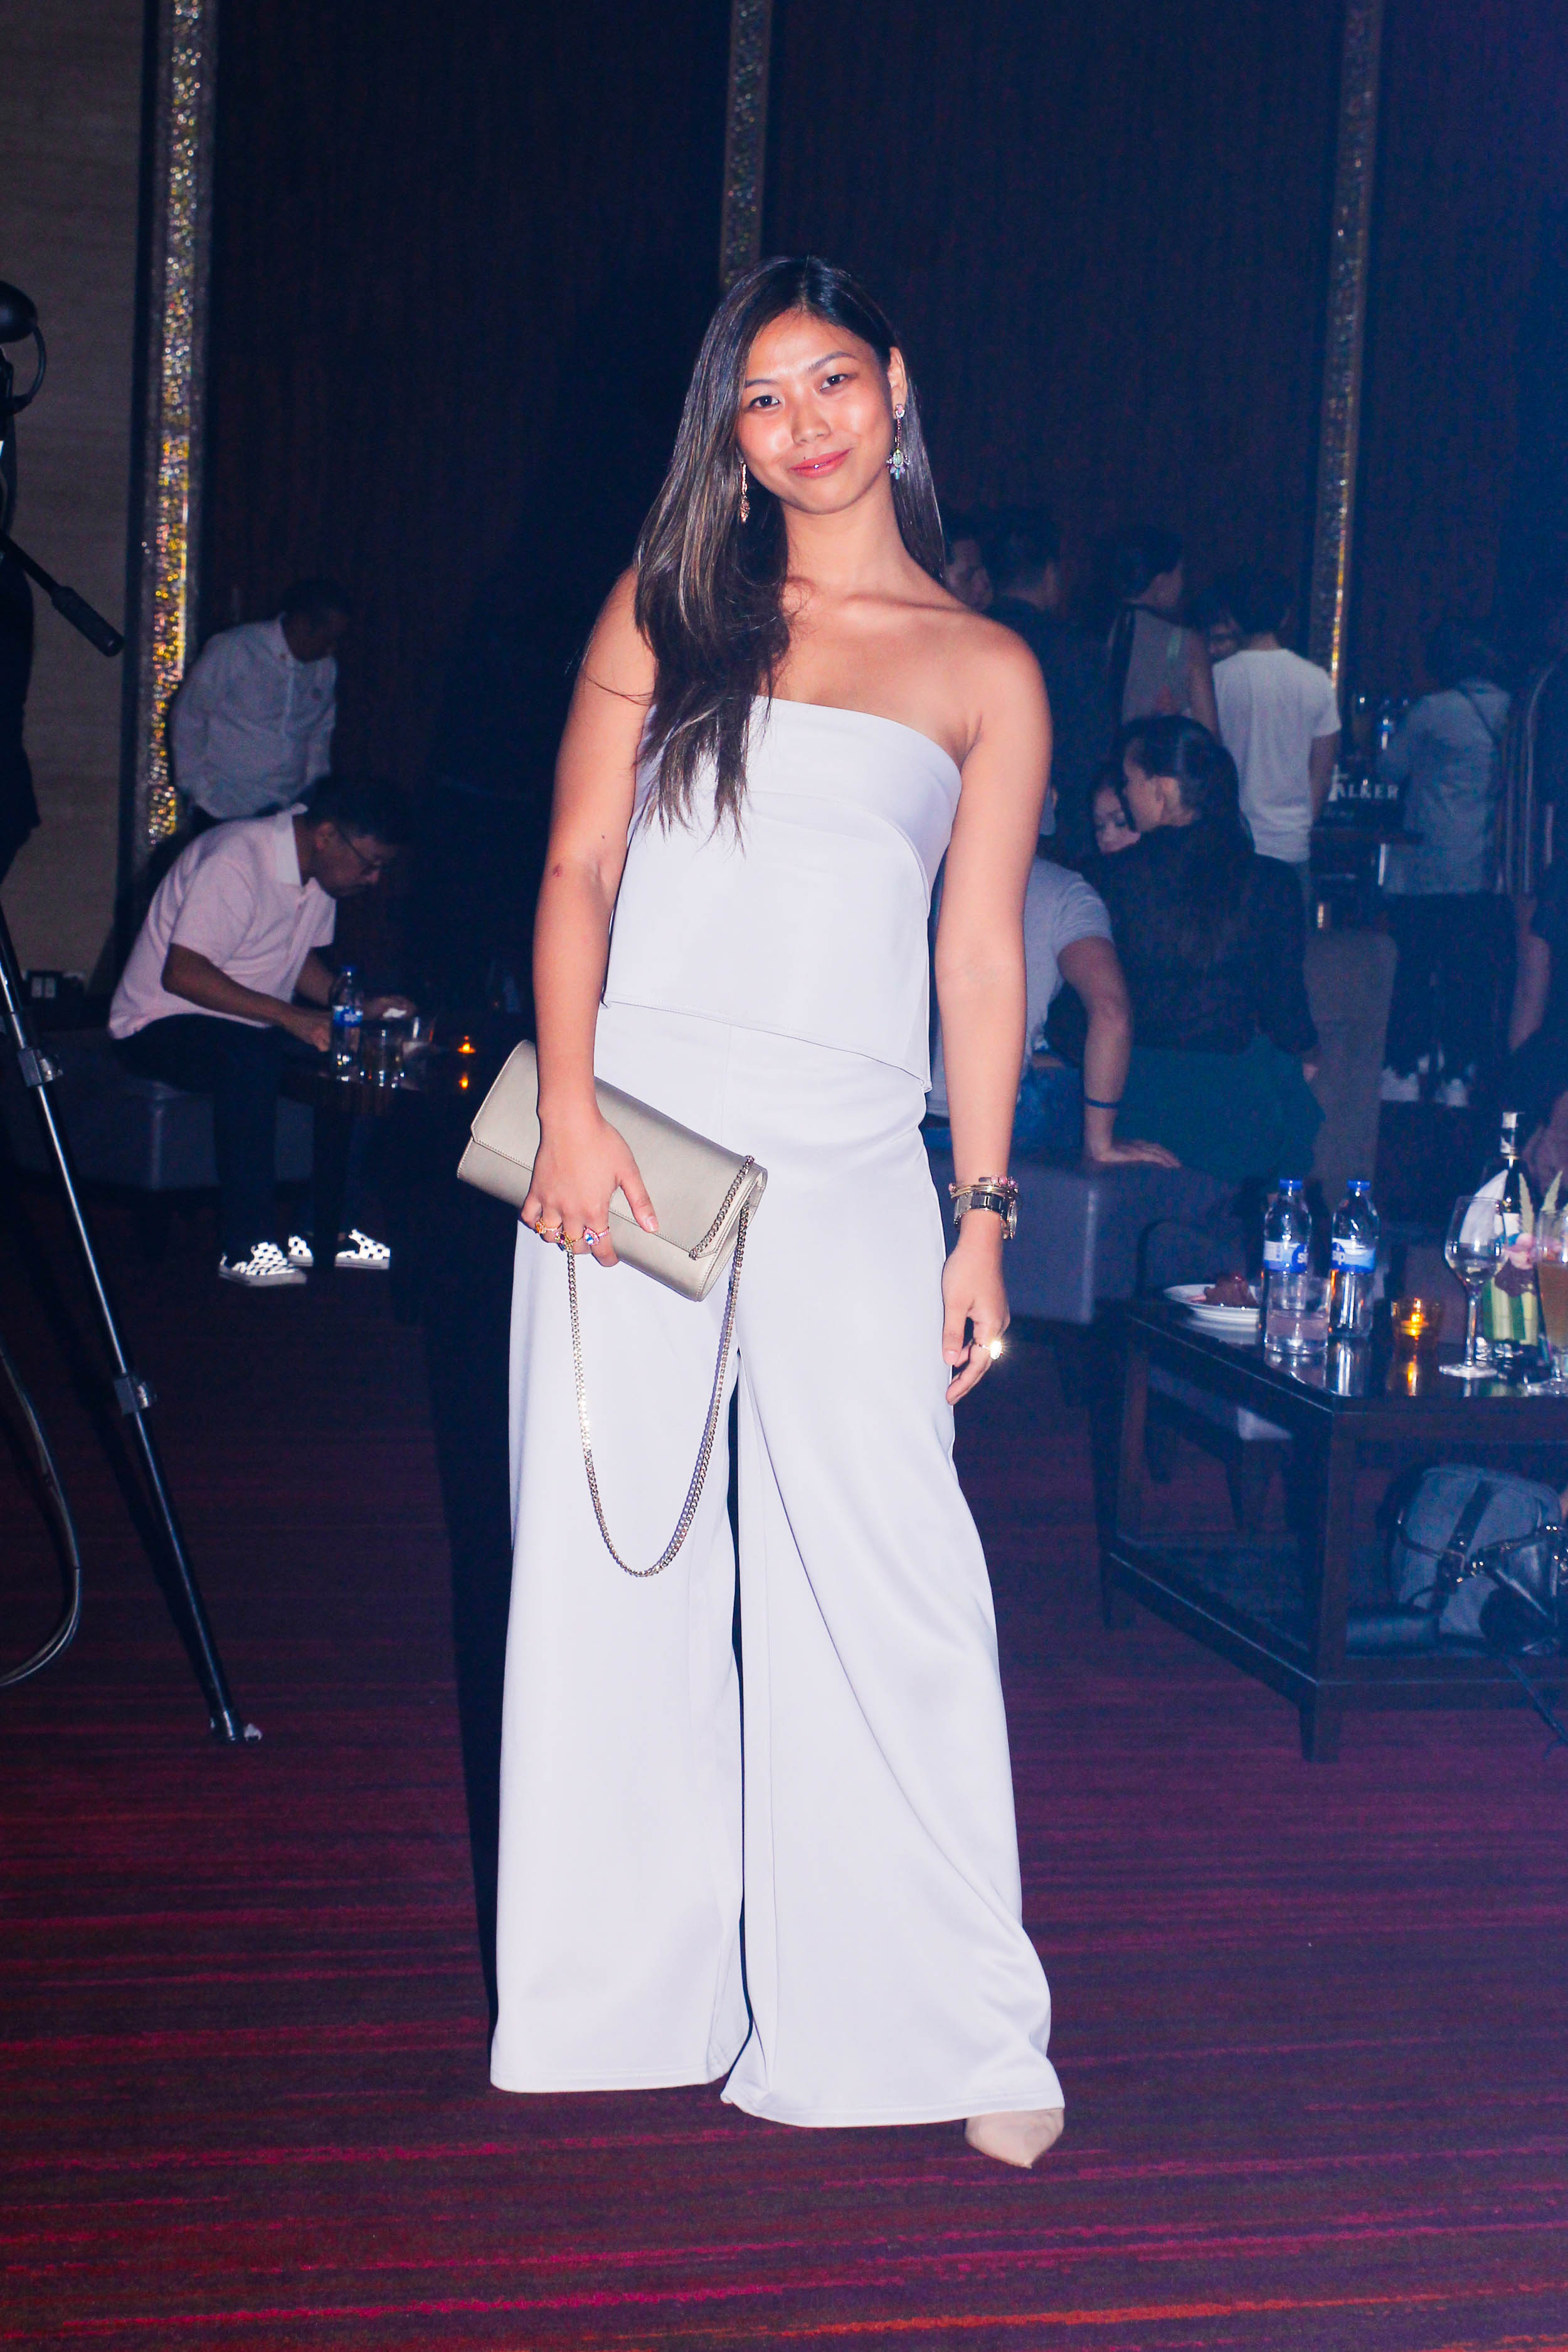 stylefestph: Here's What Went Down at the stylesocials After Parties